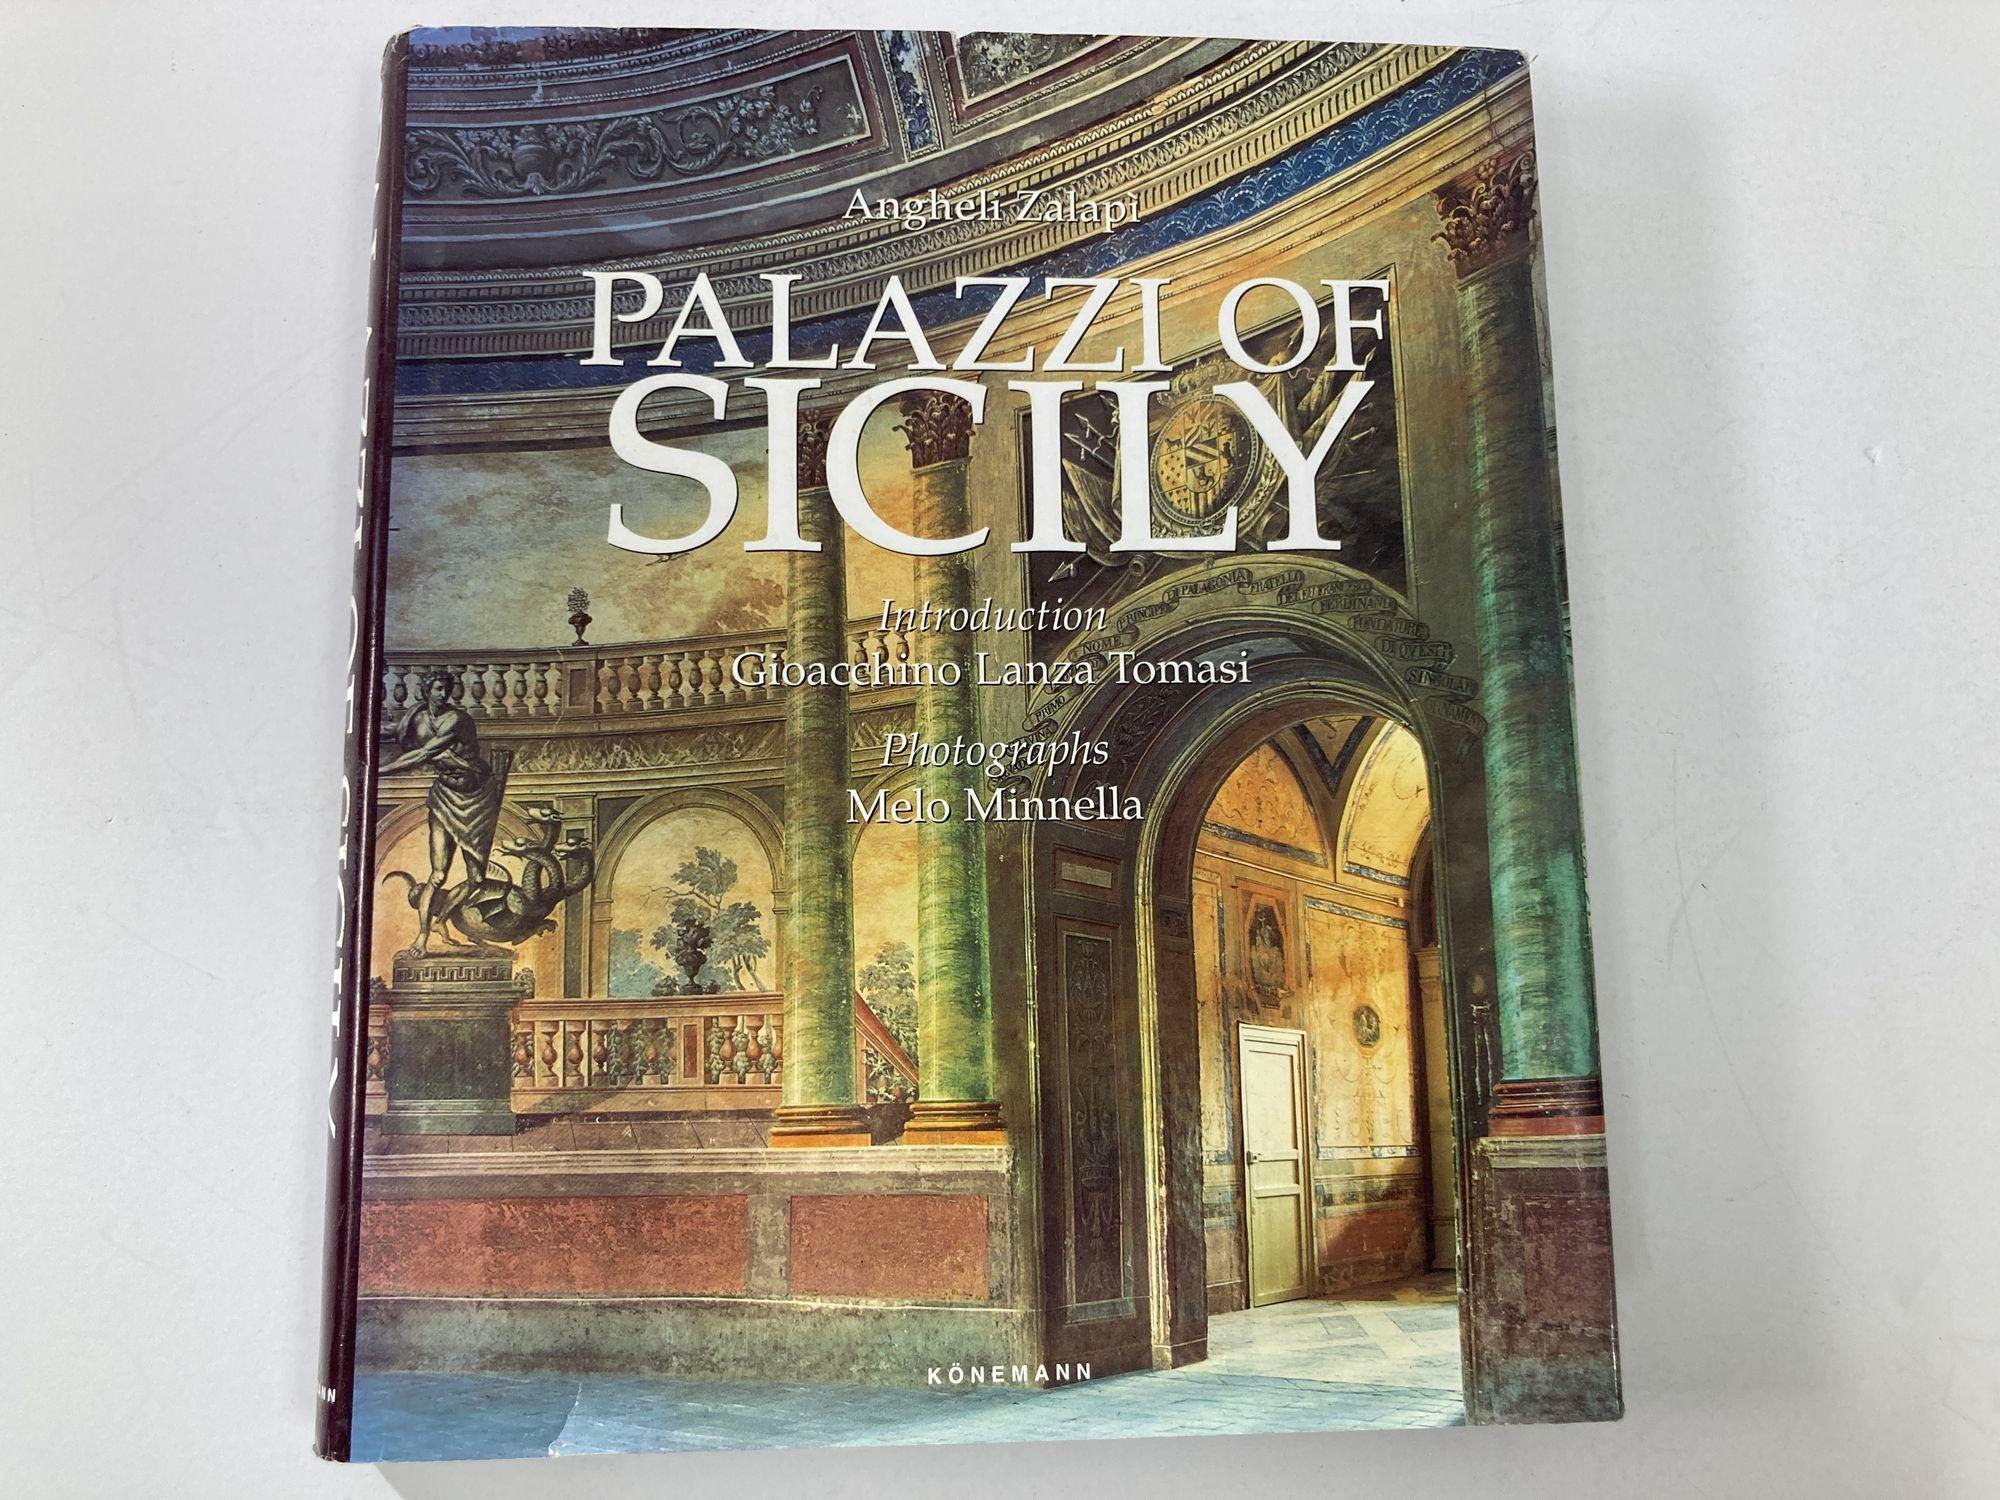 Palazzi of Sicily by Angheli Zalapi Hardcover.
This book is the first to trace the evolution in style of the fabulous homes that have been built on the island of Sicily, from feudal castles to city mansions and country villas.
Hardcover, 324